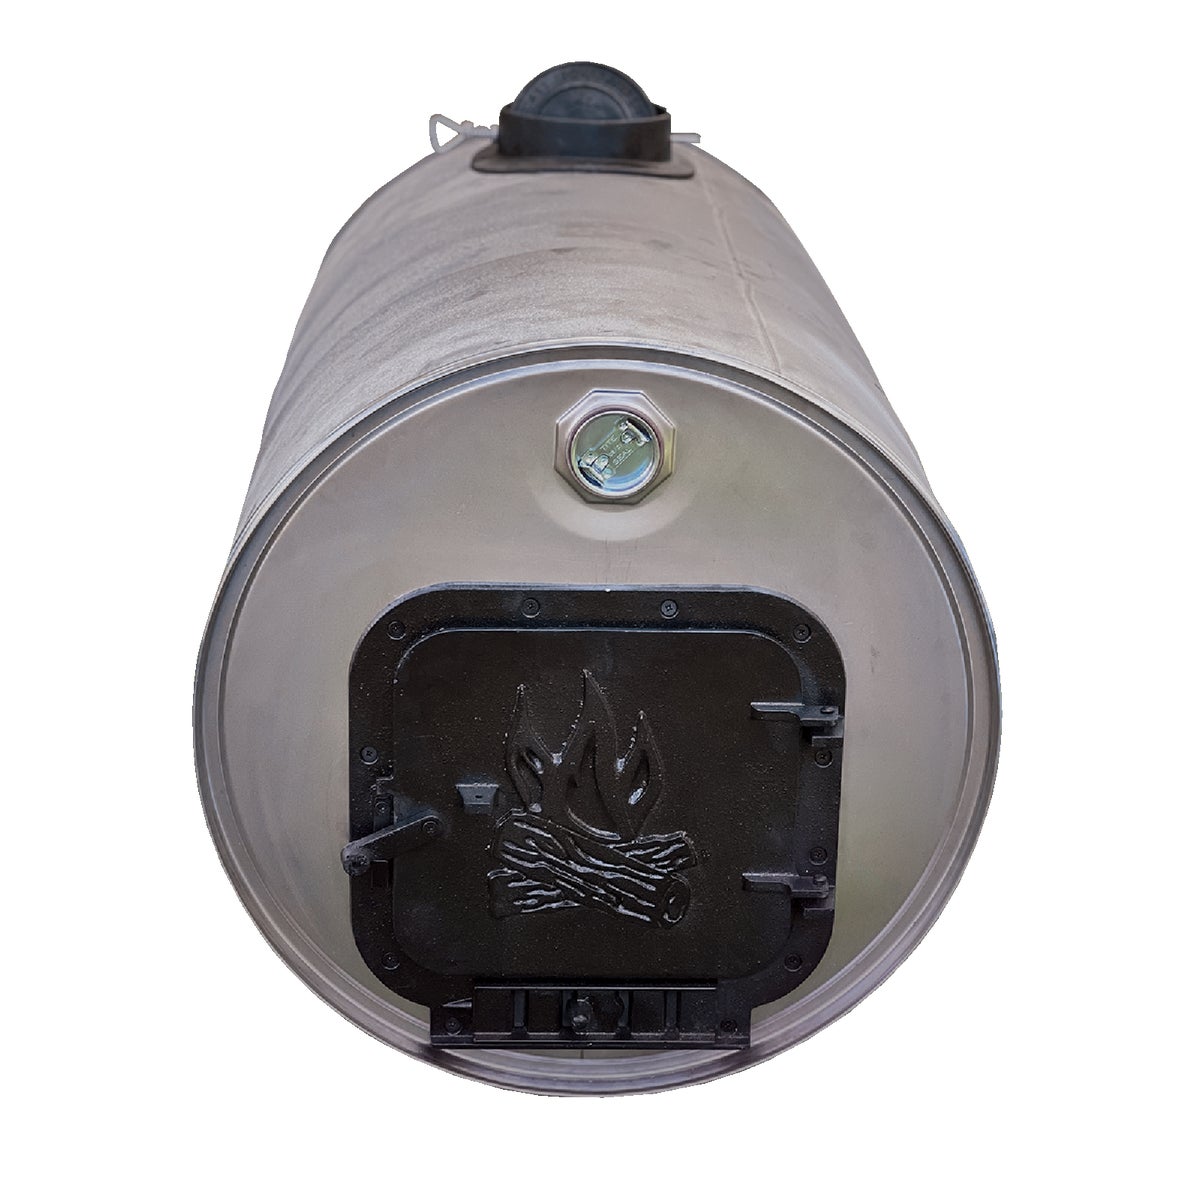 Item 404500, Cast-iron. Converts 30 gallon or 55 gallon drum into woodburning heater.